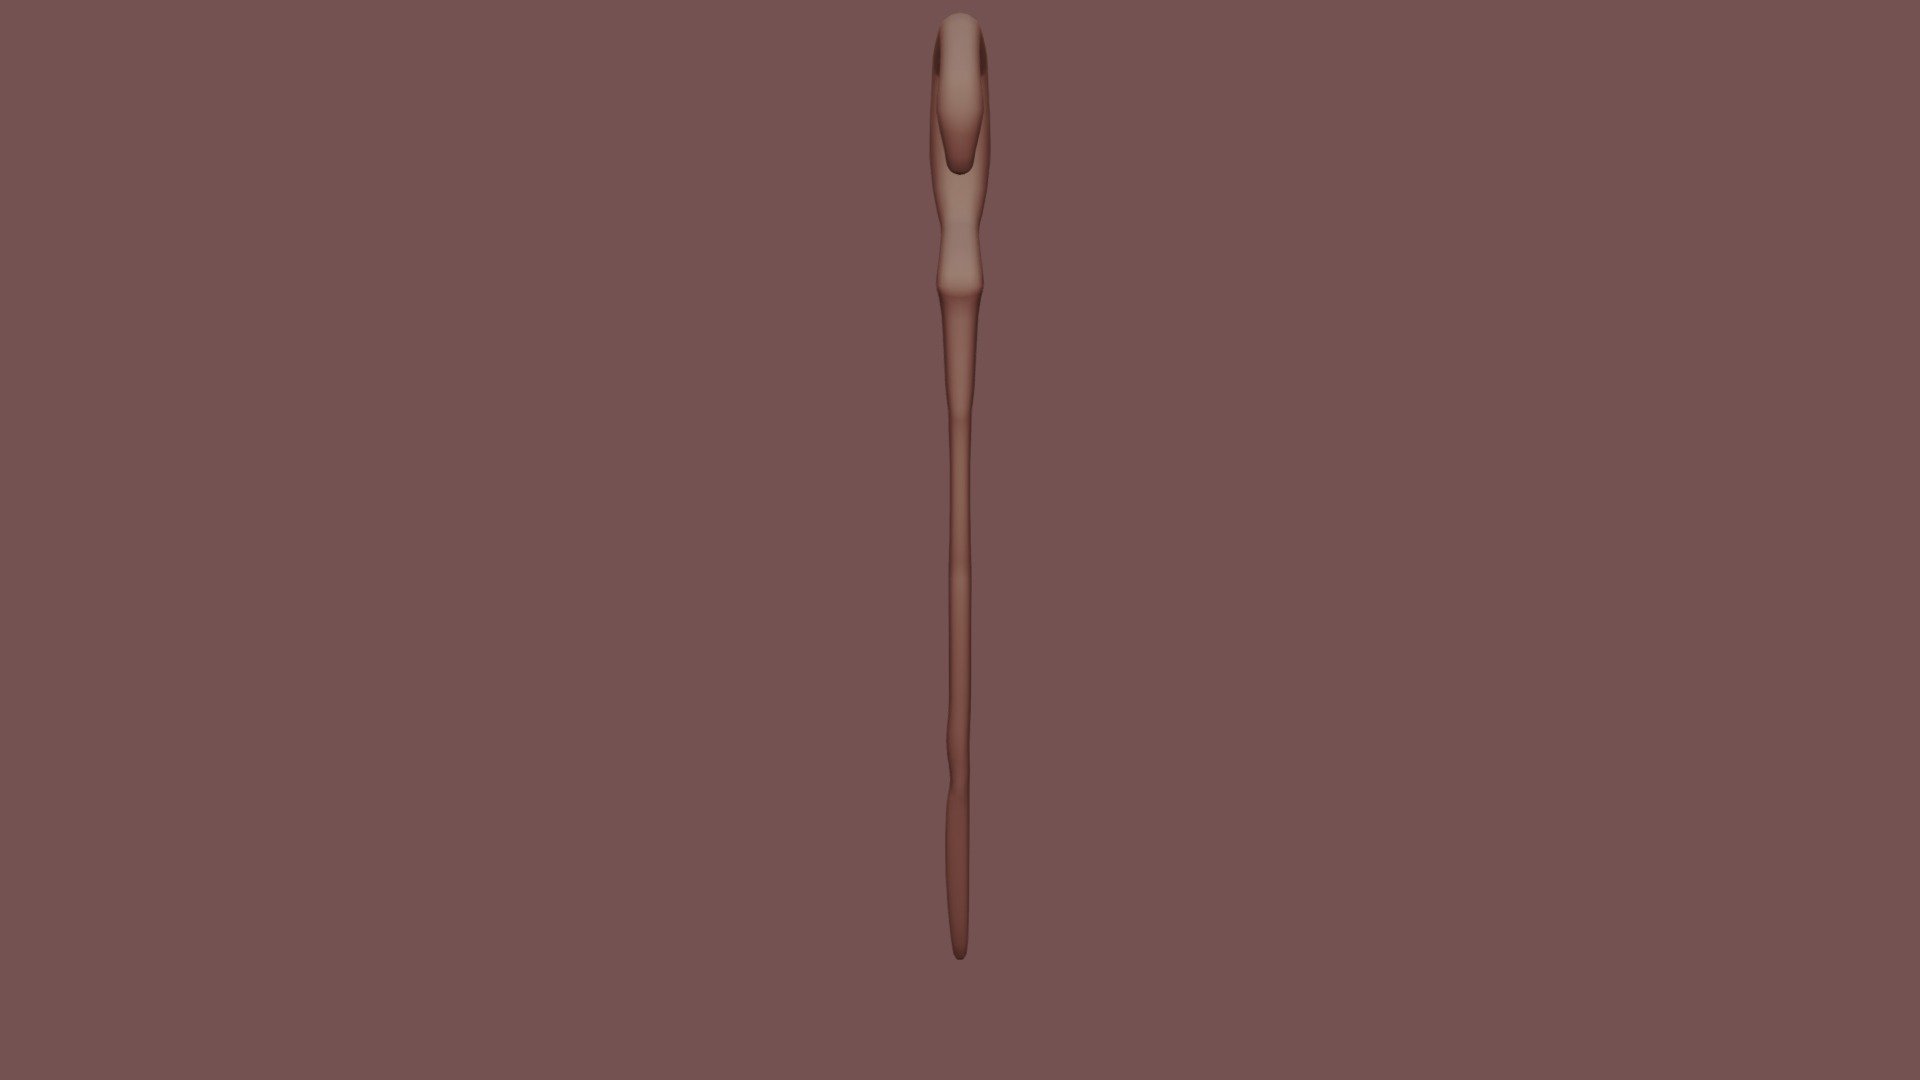 A Mage's Staff